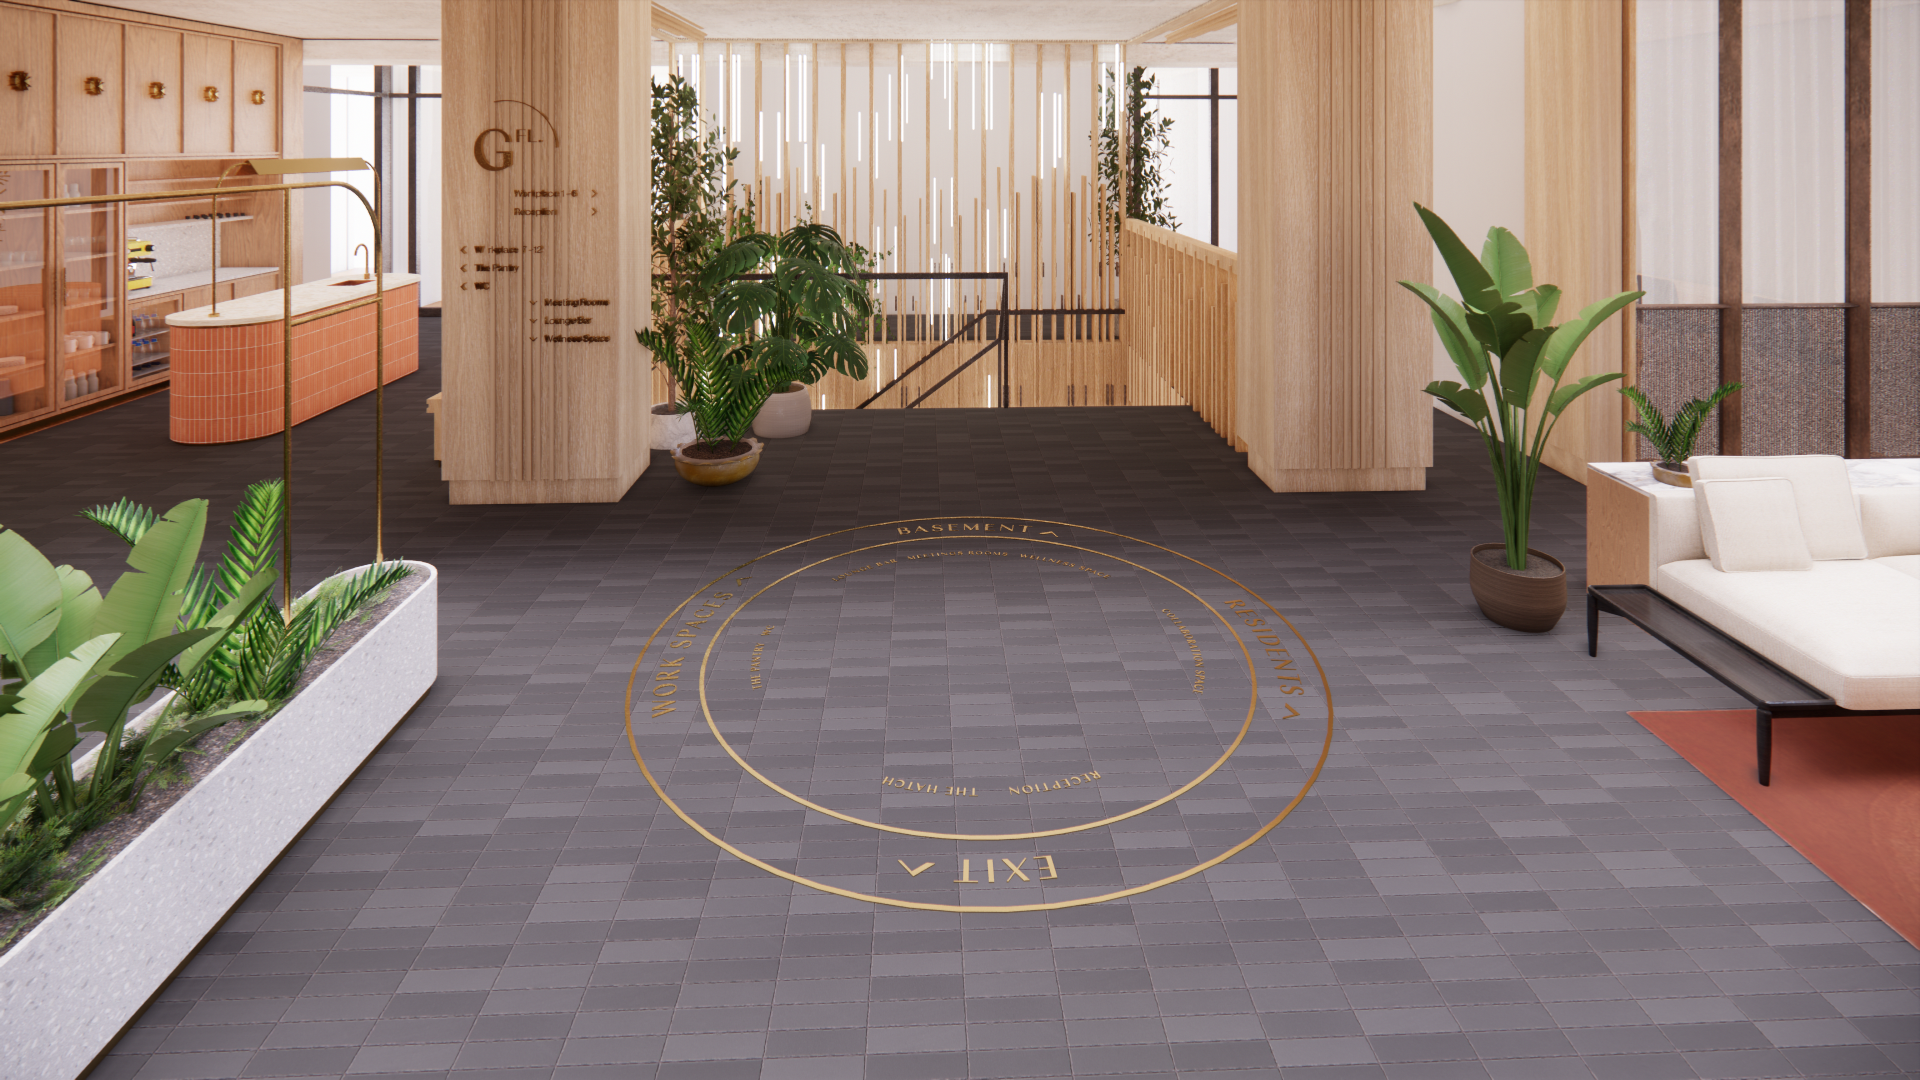 Floor wayfinding in office spaces featuring a modern application of brand identity